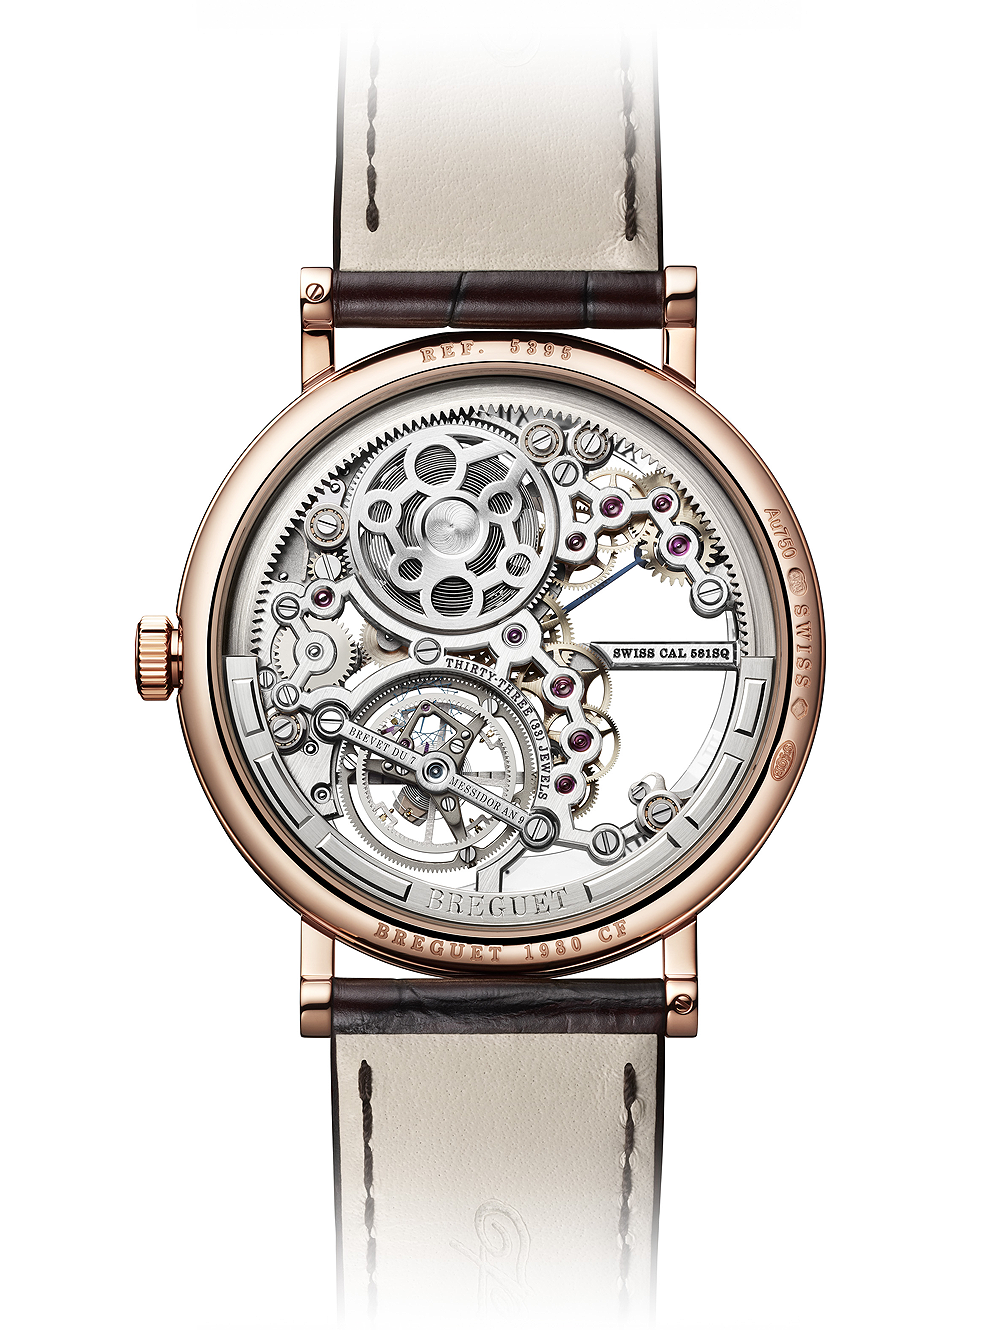 Showing at WatchTime New York 2019: Breguet Classique Tourbillon Extra ...